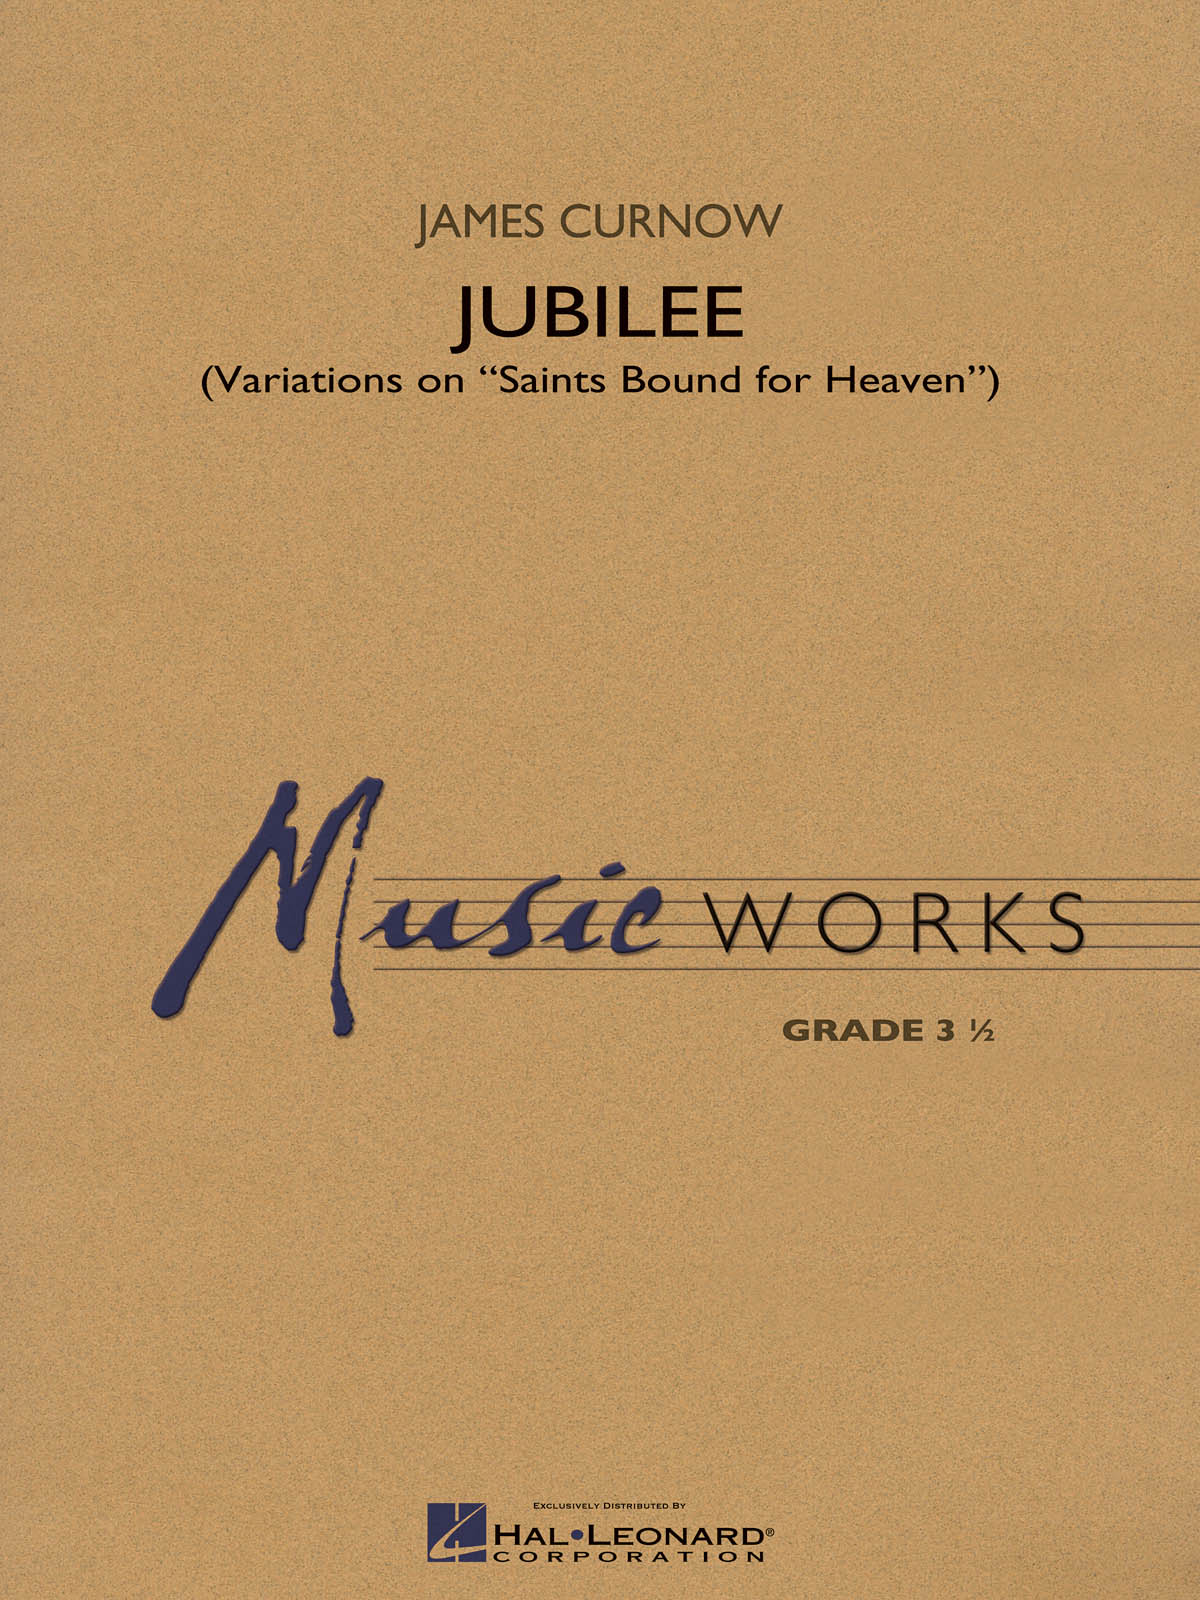 James Curnow: Jubilee (Variations on Saints Bound for Heaven): Concert Band: